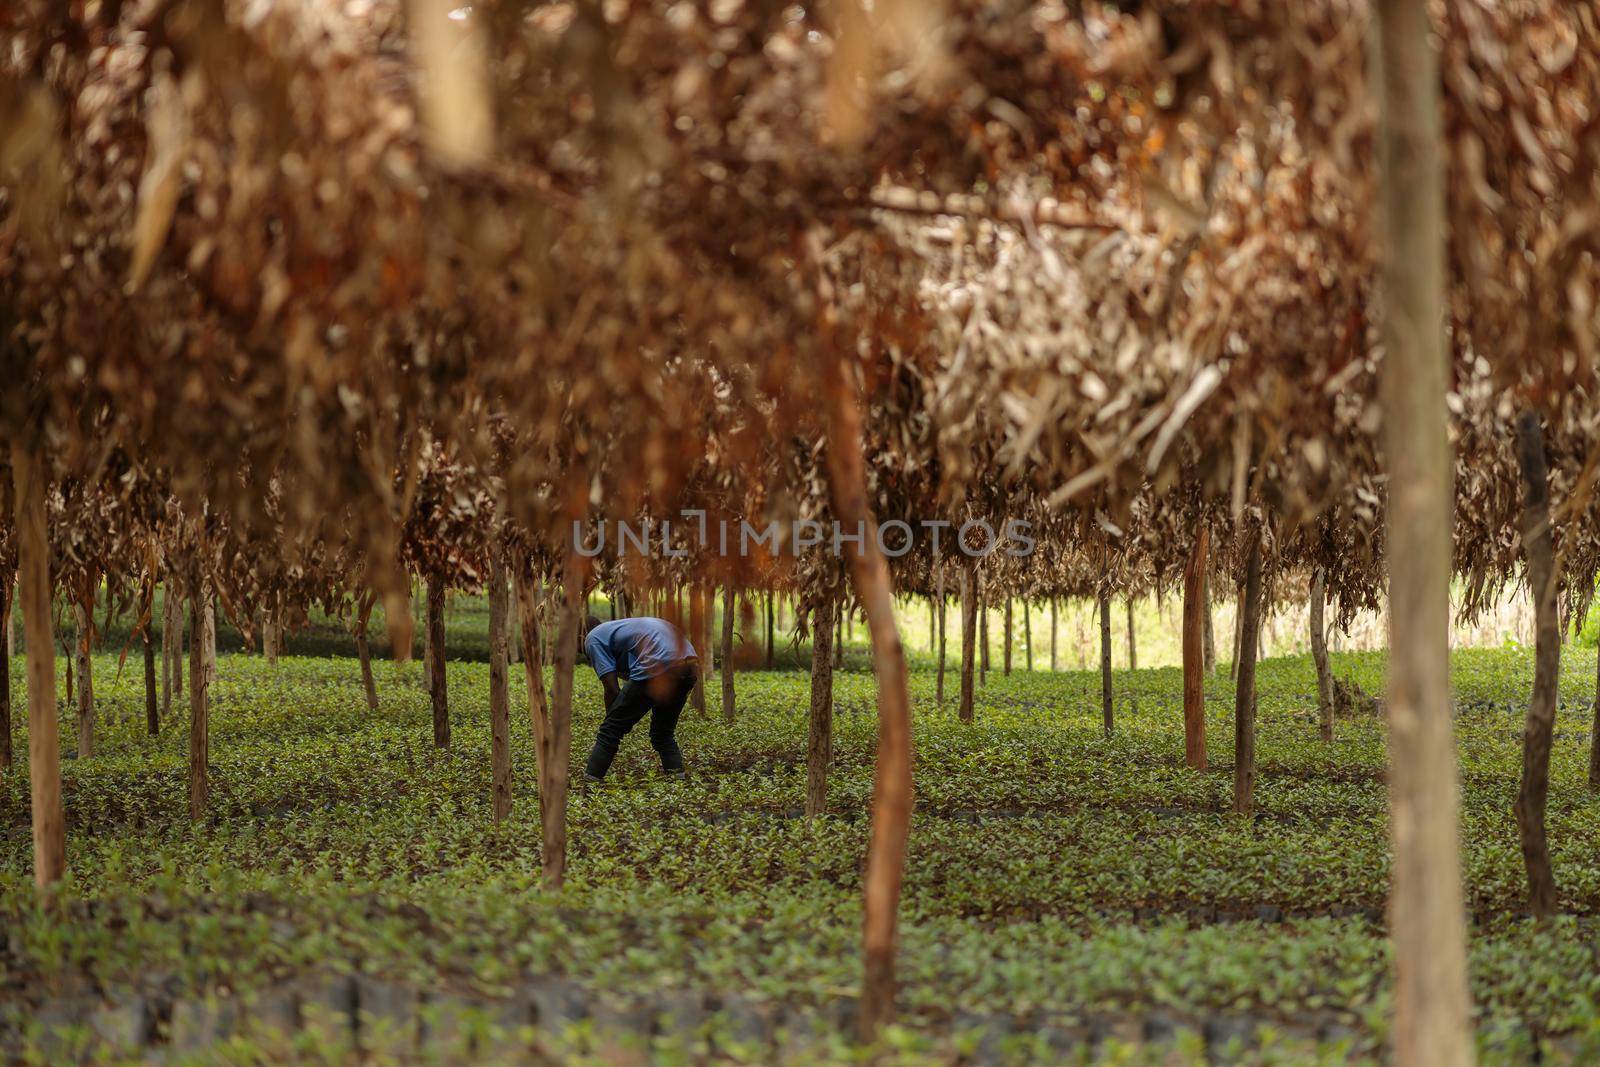 Worker processing coffee sprouts among trees on a plantation by Yaroslav_astakhov